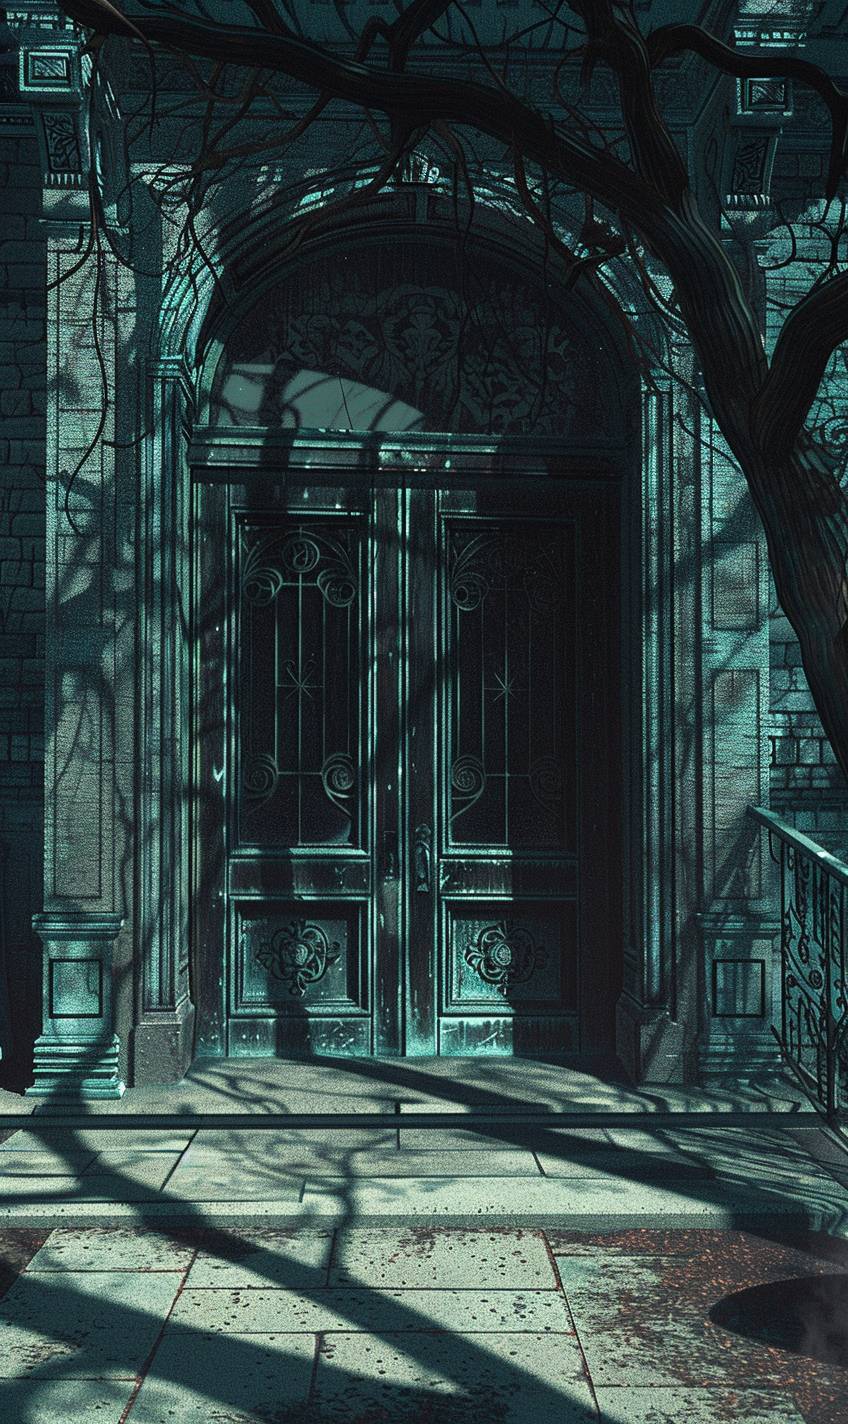 In style of Kawase Hasui, Haunted mansion with creaking doors and shadows